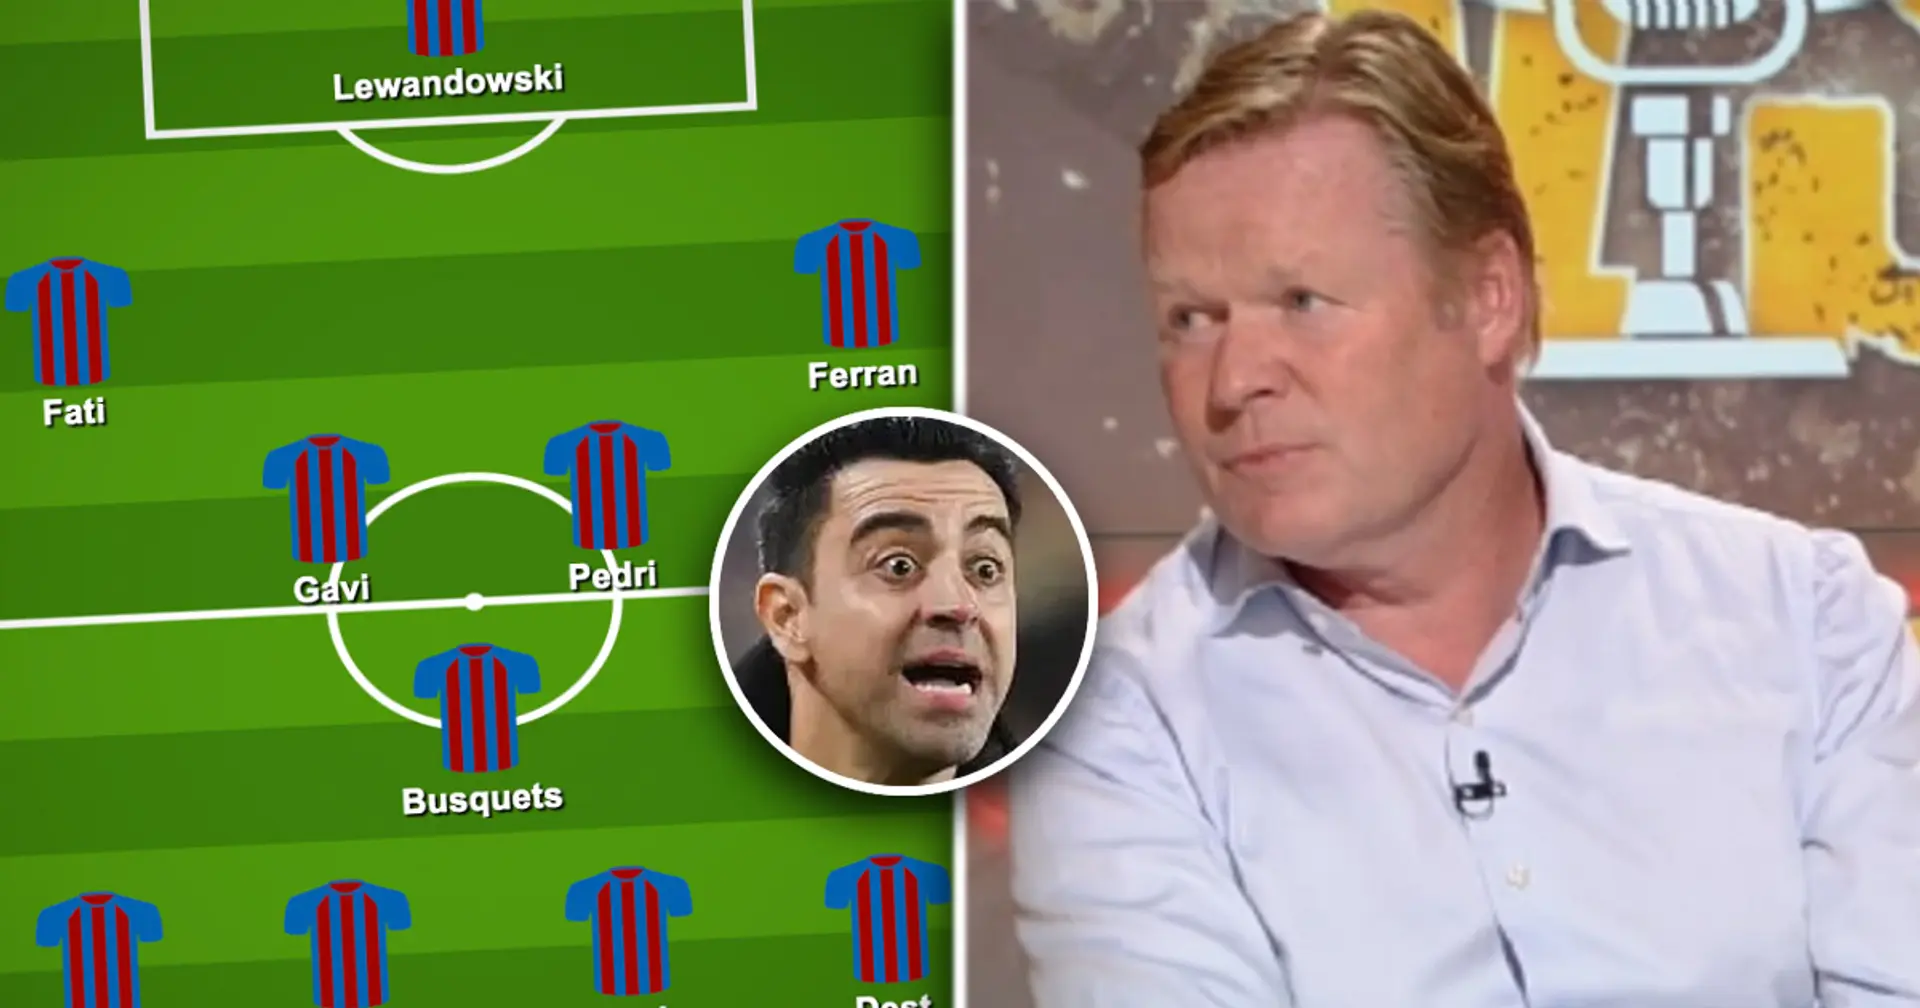 'They live in the past': Koeman criticises Barca for sticking with 4-3-3 formation